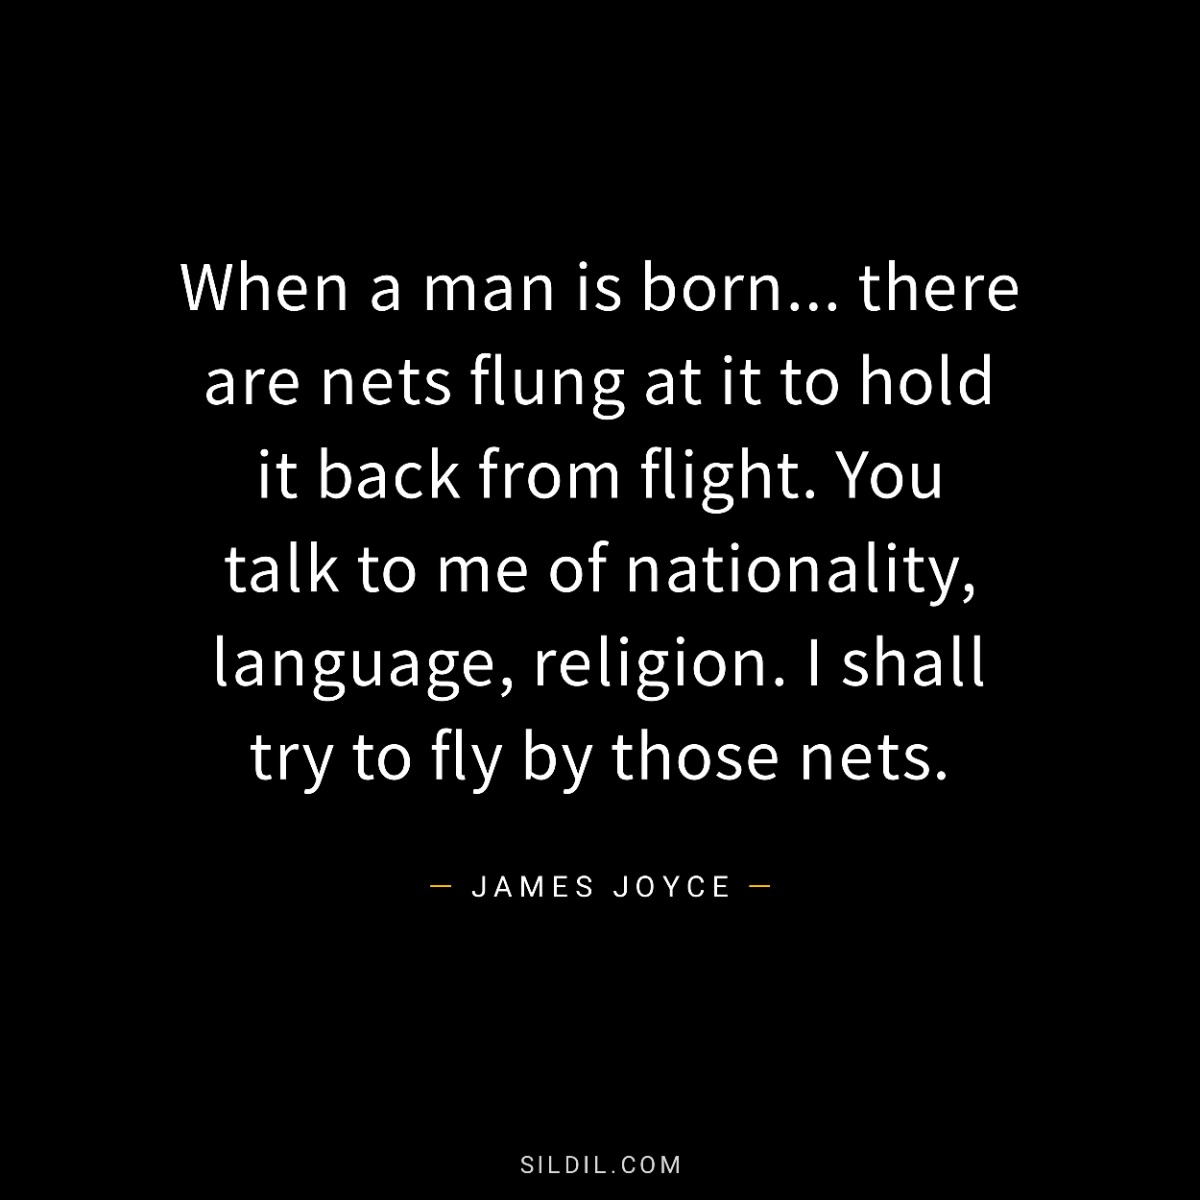 When a man is born... there are nets flung at it to hold it back from flight. You talk to me of nationality, language, religion. I shall try to fly by those nets.